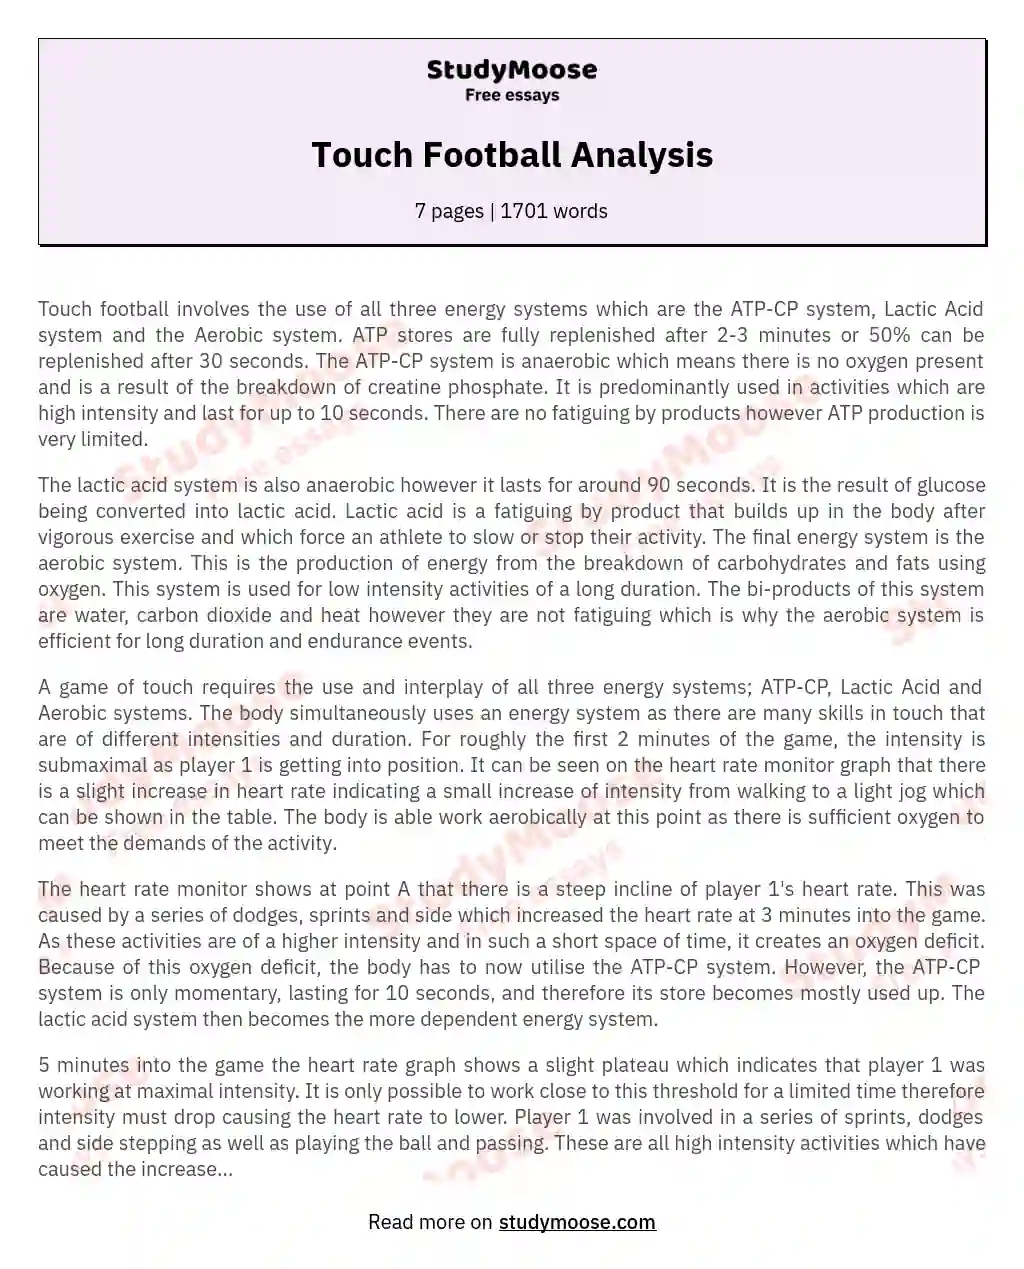 Touch Football Analysis essay